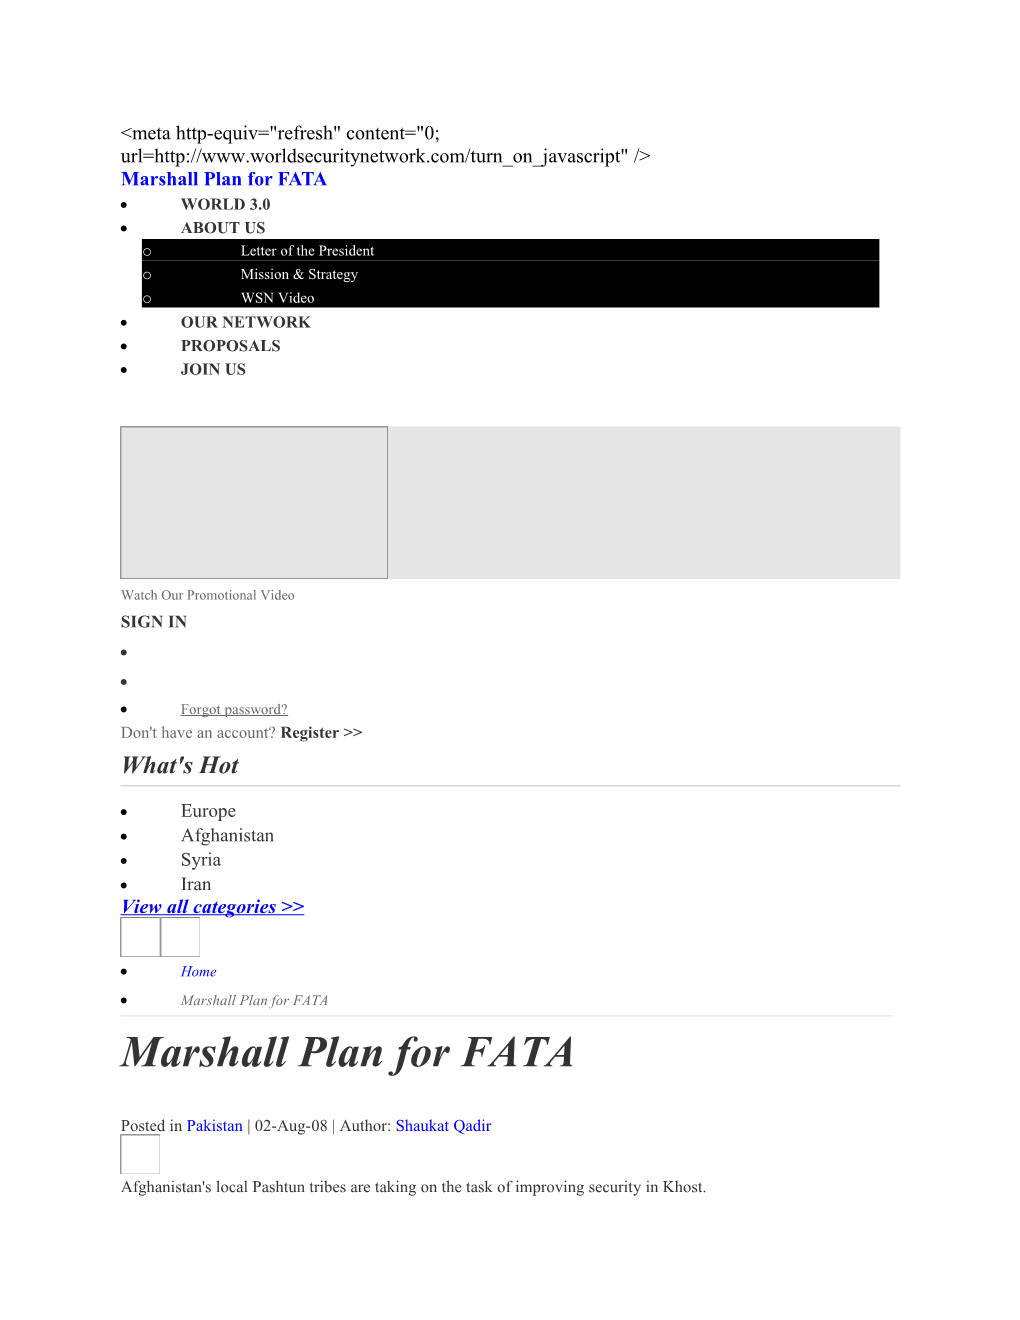 Marshall Plan for FATA Conflict Resolutions and World Security Solutions